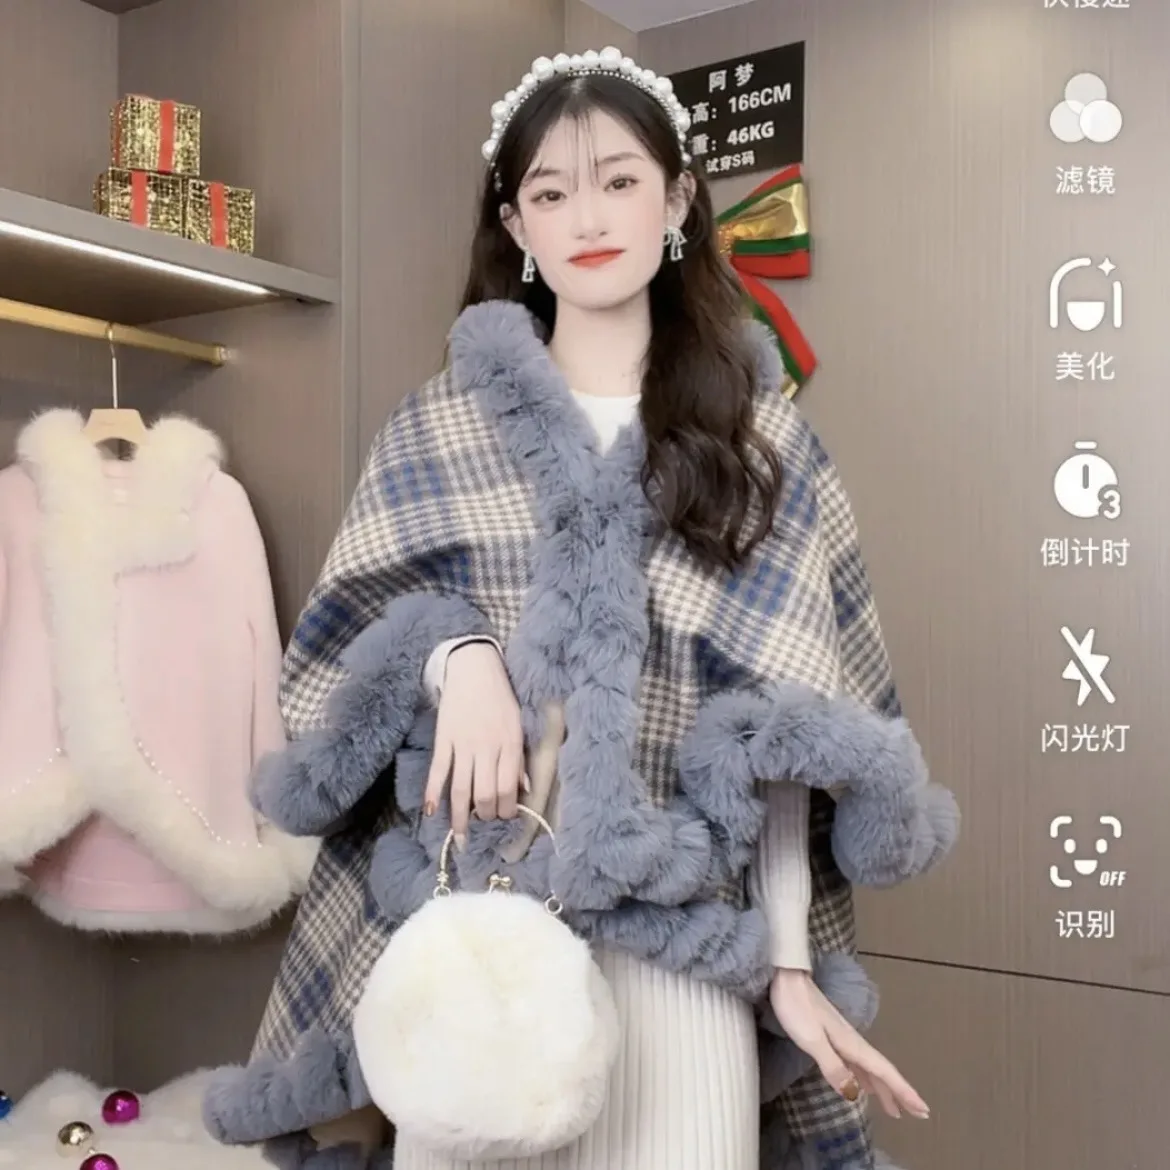 2021 Oversize Long Sleeve Vintage Warm Coat Winter Two Layer Faux Fur Pashmina Women Striped Plaid Printed Female Cardigan Shawl women gril long pashmina burgundy color turkish made 100 acrylic elegant lovely quality product 2021 trend fashion style pancho model handy